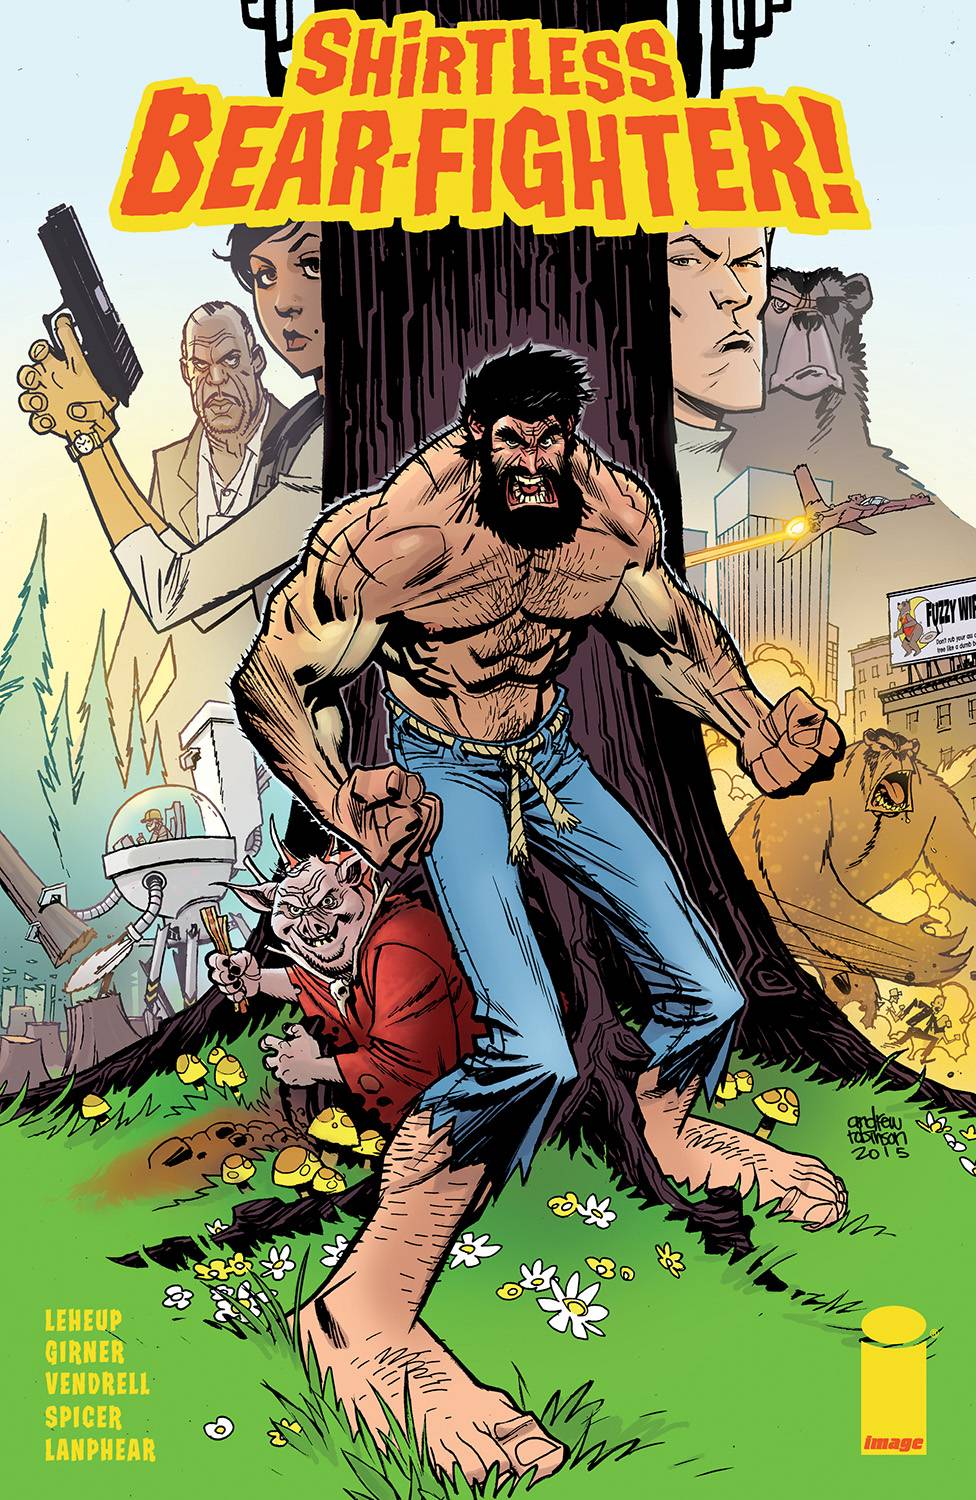 Shirtless Bear-Fighter #1 Cover A Robinson